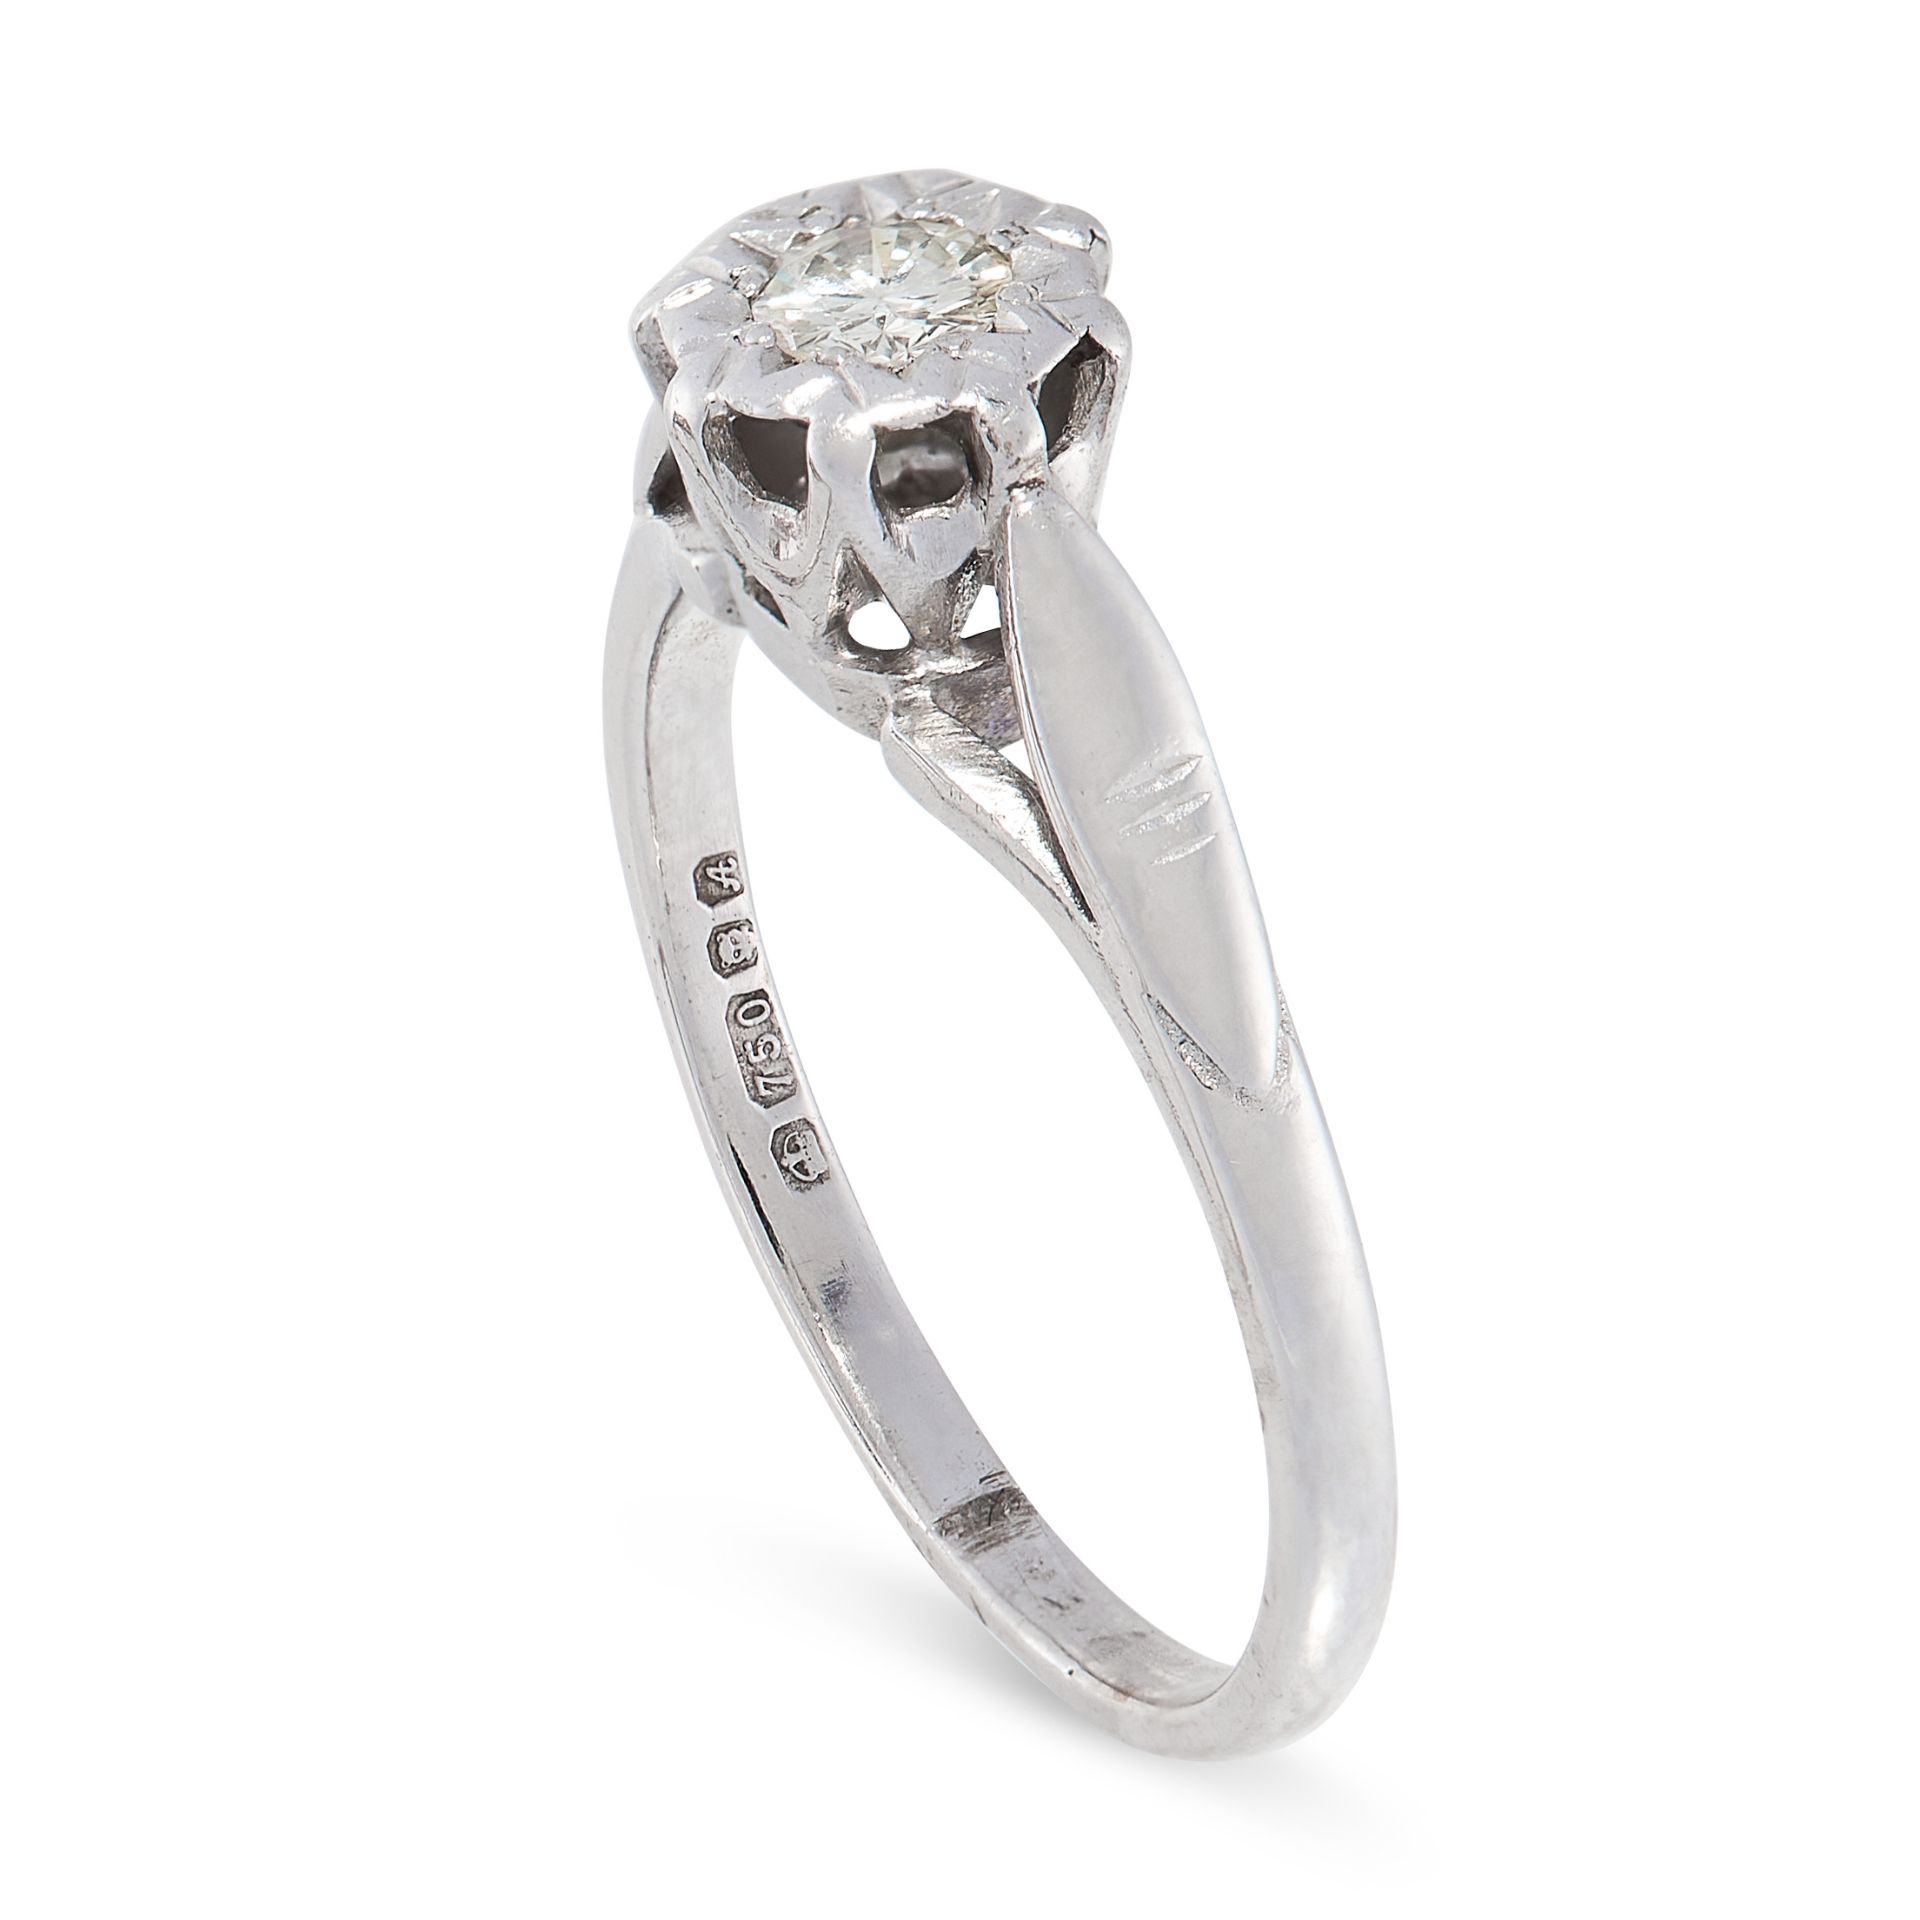 A DIAMOND SOLITAIRE RING in 18ct white gold, set with a round cut diamonds, British hallmarks, - Image 2 of 2